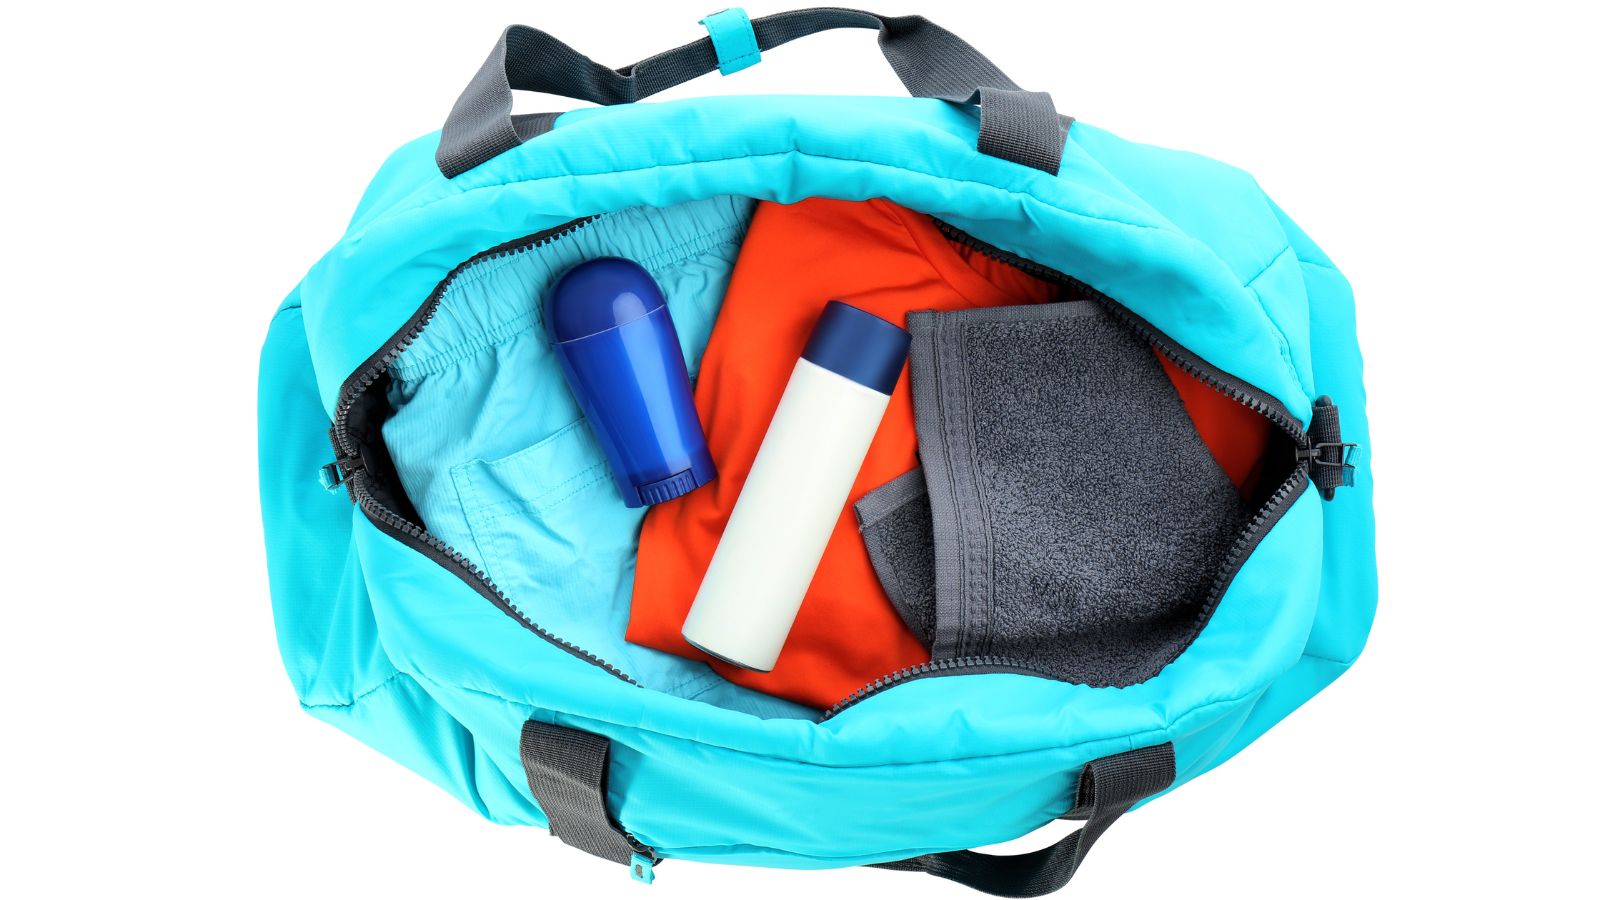 Our gym bag essentials! DETOX is currently 10% off so grab your